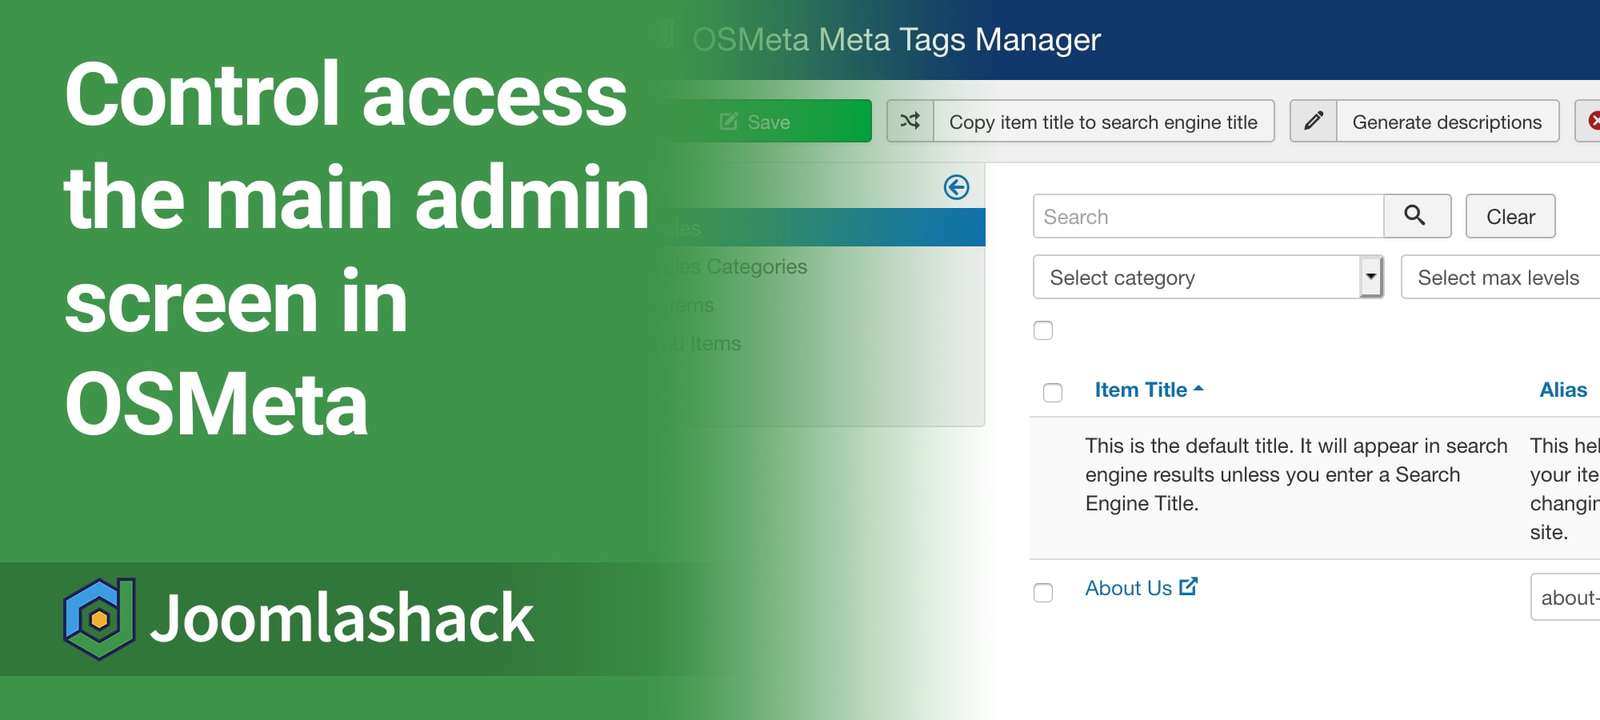 How to Allow a Joomla User Backend Administration Access Only to OSMeta